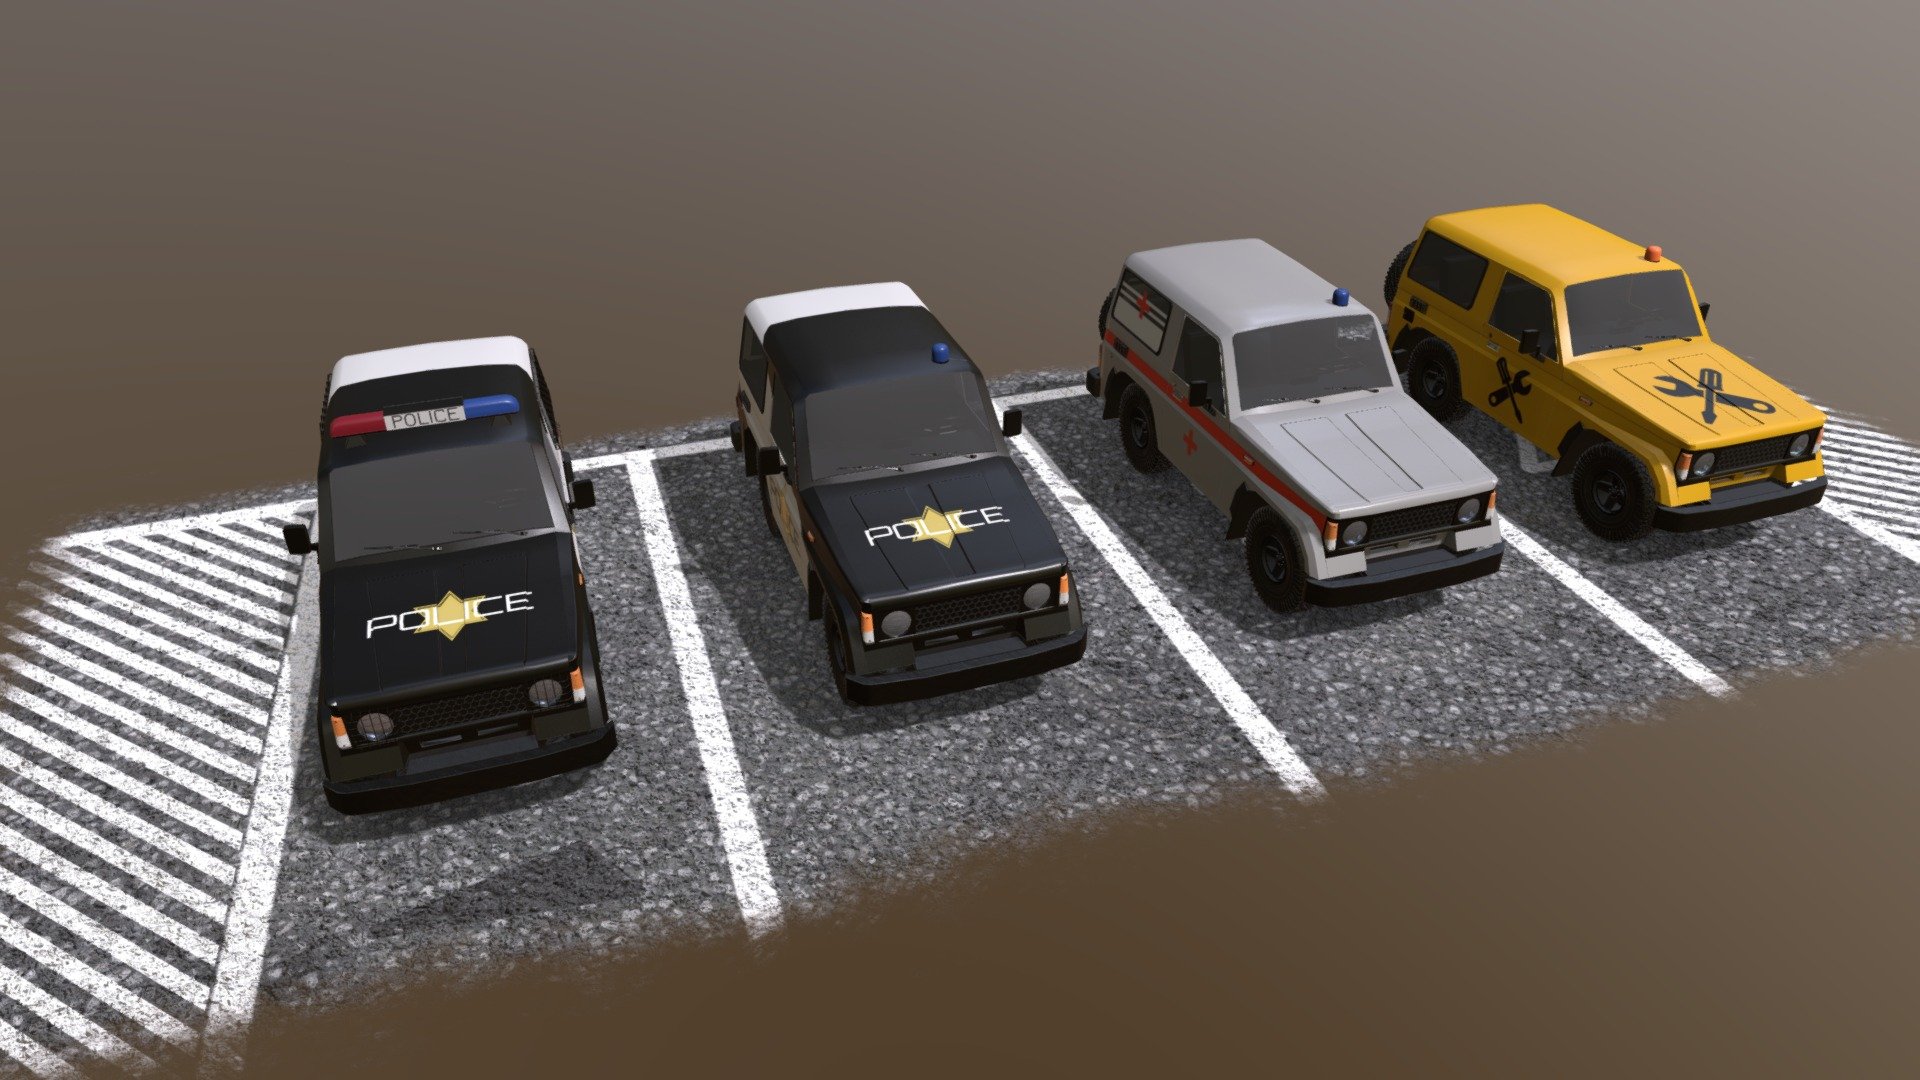 Vehicle Mini Pack 4.1 #LPVMP

SUV 3-door from pack part 4 with varying textures and small details.






Low Poly Vehicle Mini Pack

Low Poly Vehicle Mini Pack 2

Low Poly Vehicle Mini Pack 3

Low Poly Vehicle Mini Pack 4

Low Poly Vehicle Mini Pack 4.2

Low Poly Vehicle Mini Pack 4.3

More lpvmp here! - Low Poly Vehicle Mini Pack 4.1 - Download Free 3D model by Vladek (@vladek27) 3d model